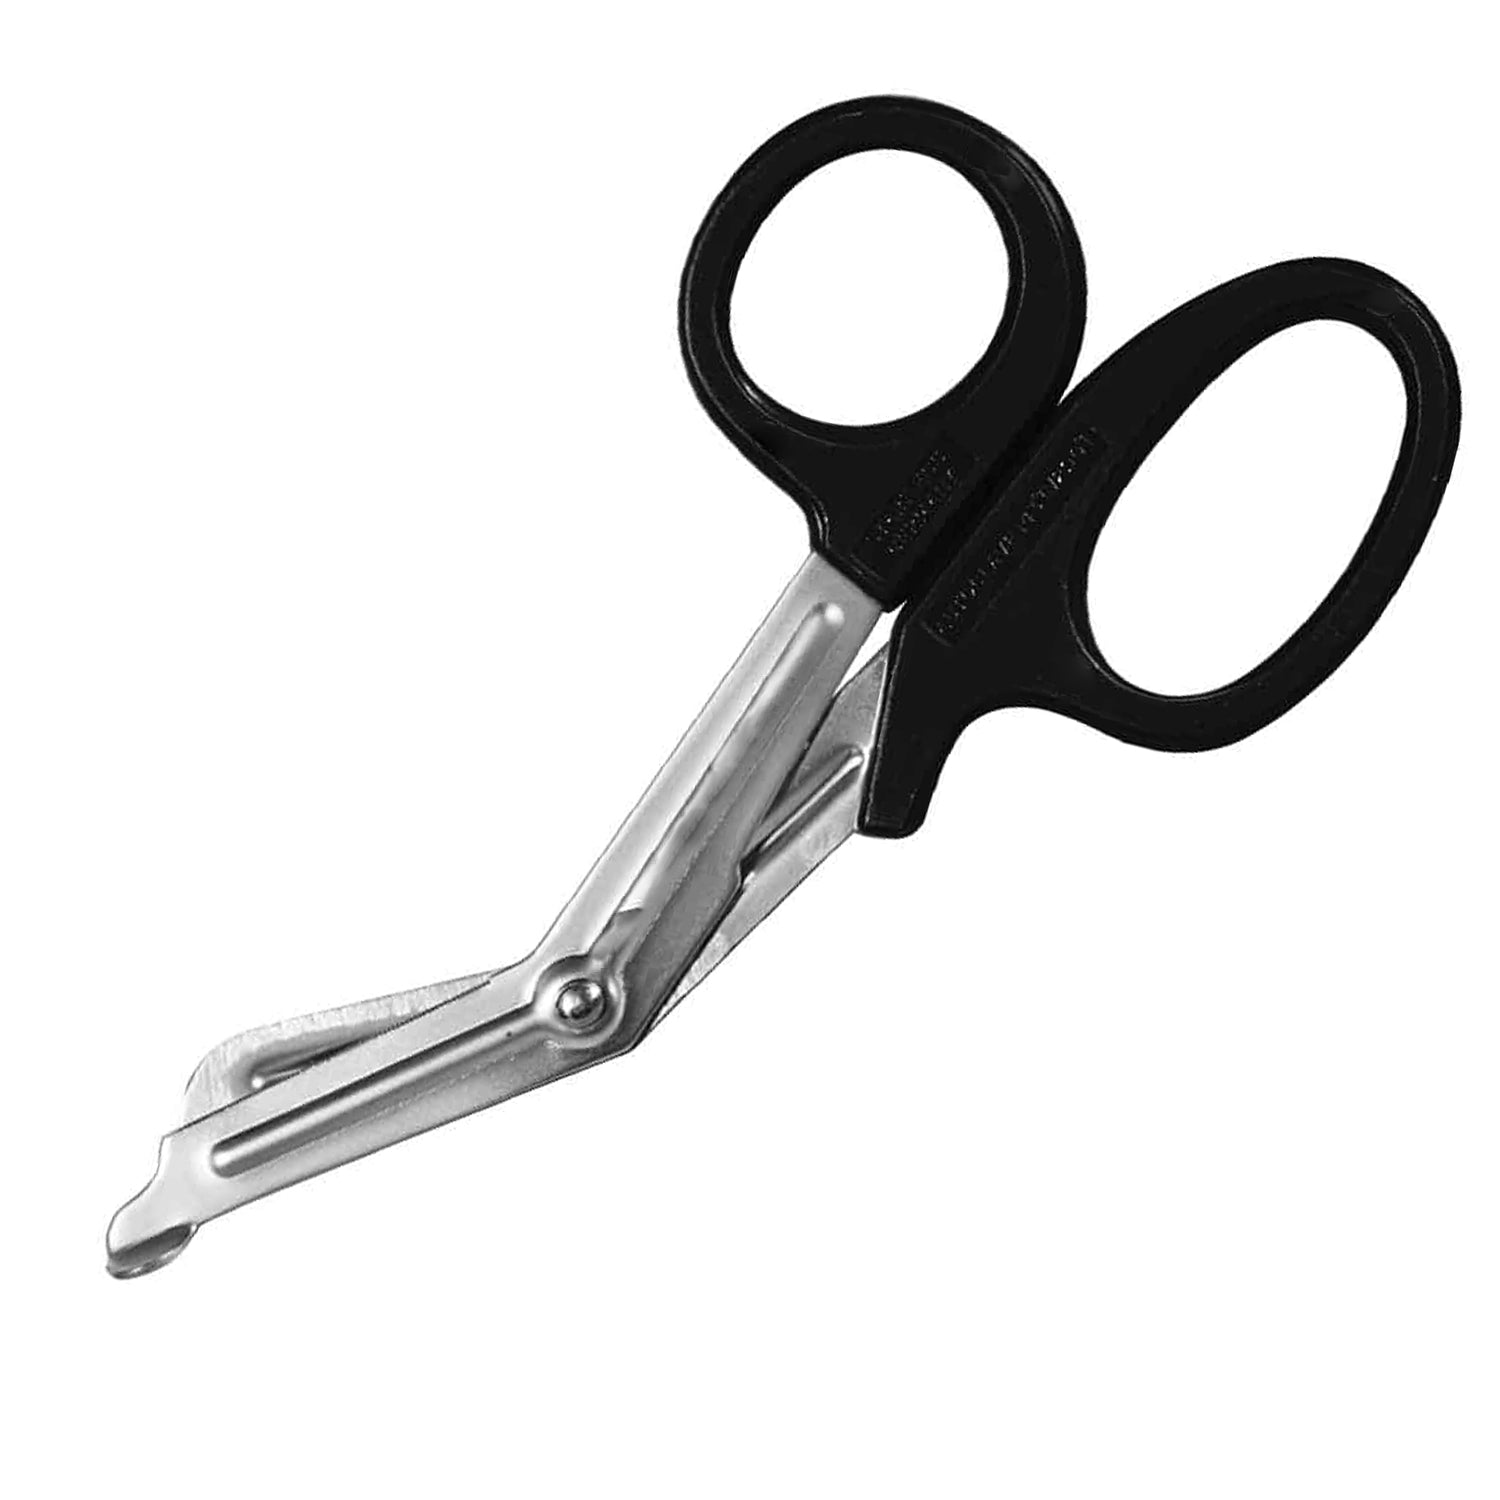 Medical Scissors Trauma Shears-8 Inches Bandage Scissors Strong Surgical  Grade